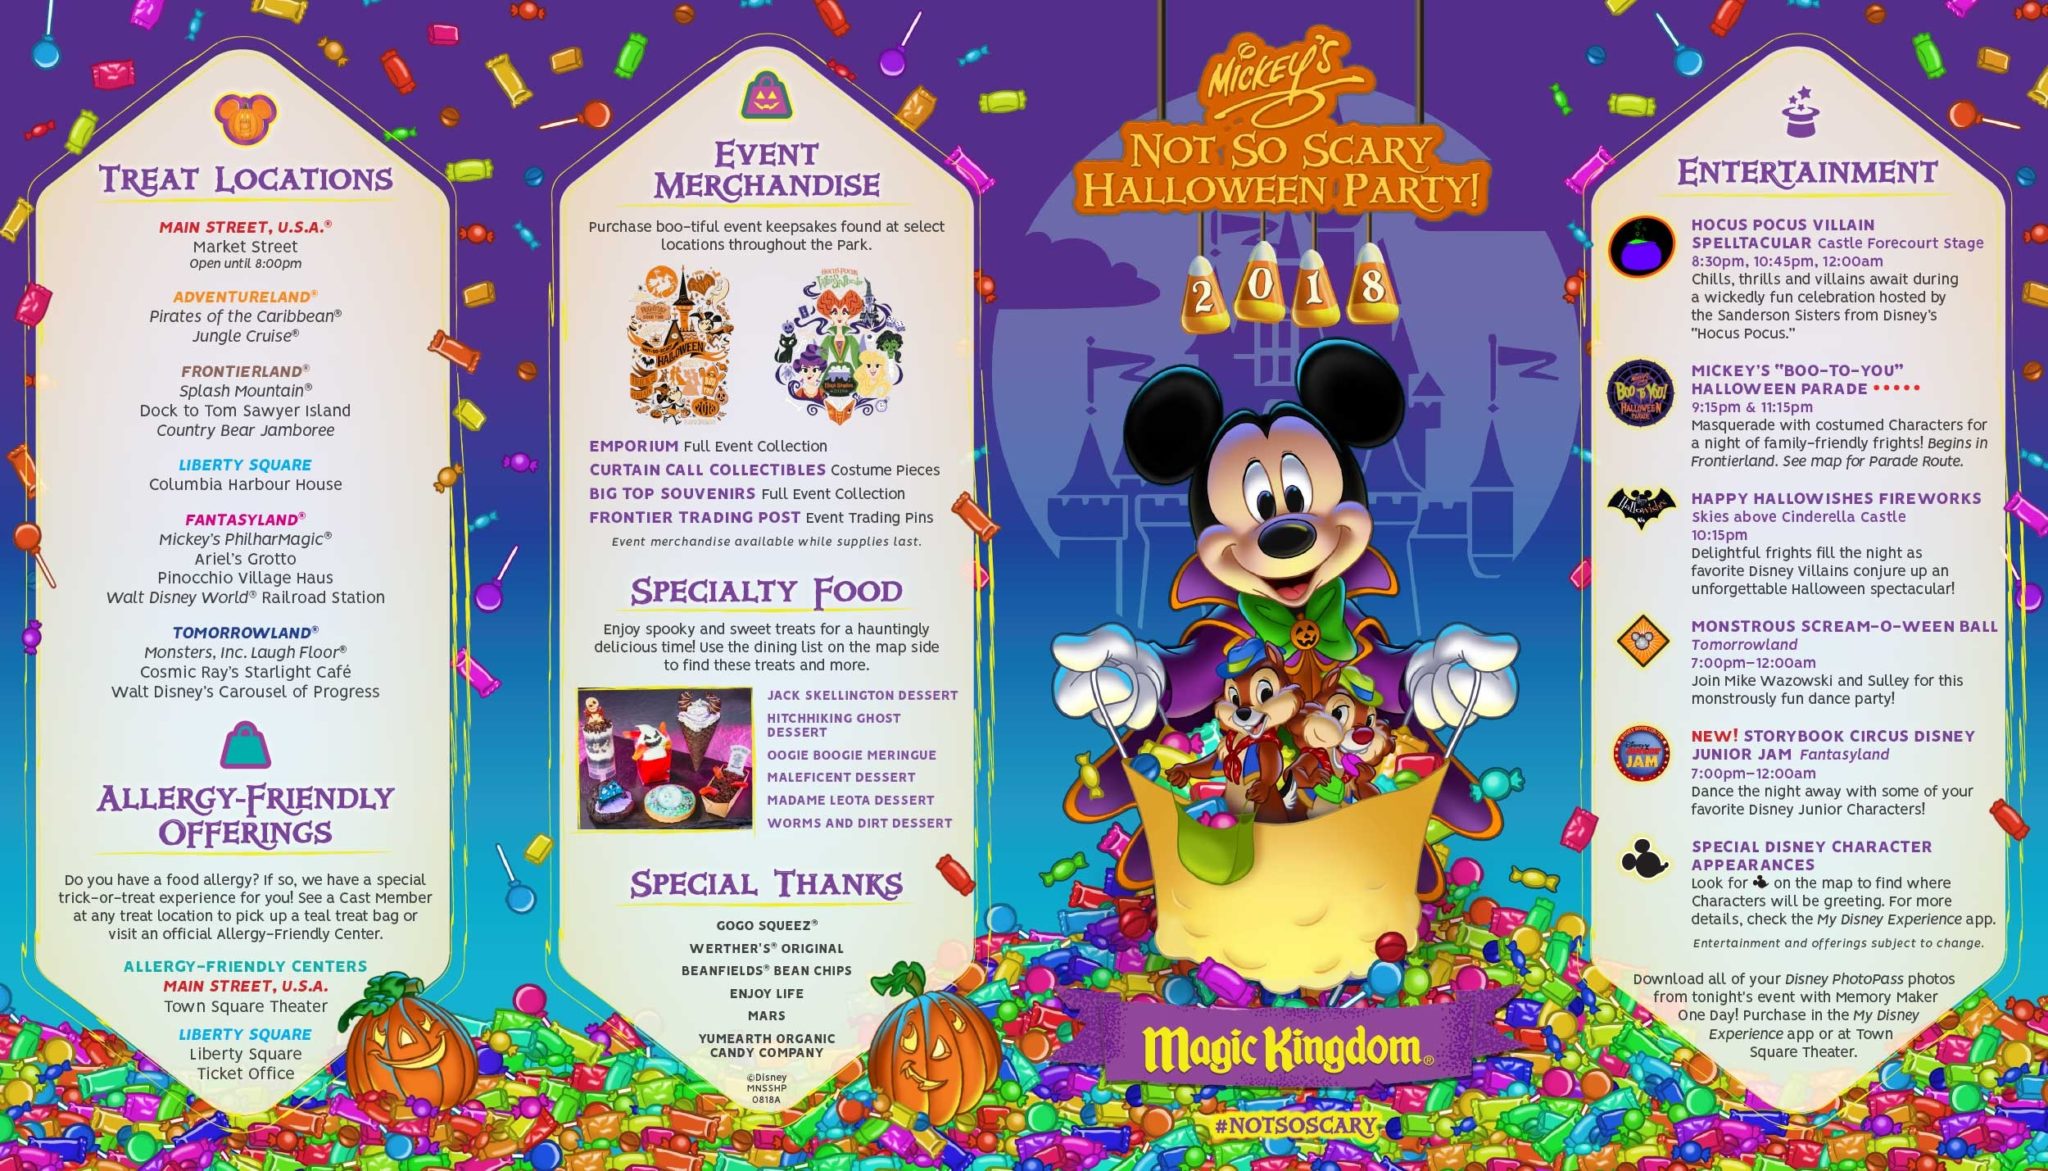 Mickey's Not So Scary Halloween Party Tickets Are On Sale Now and Some